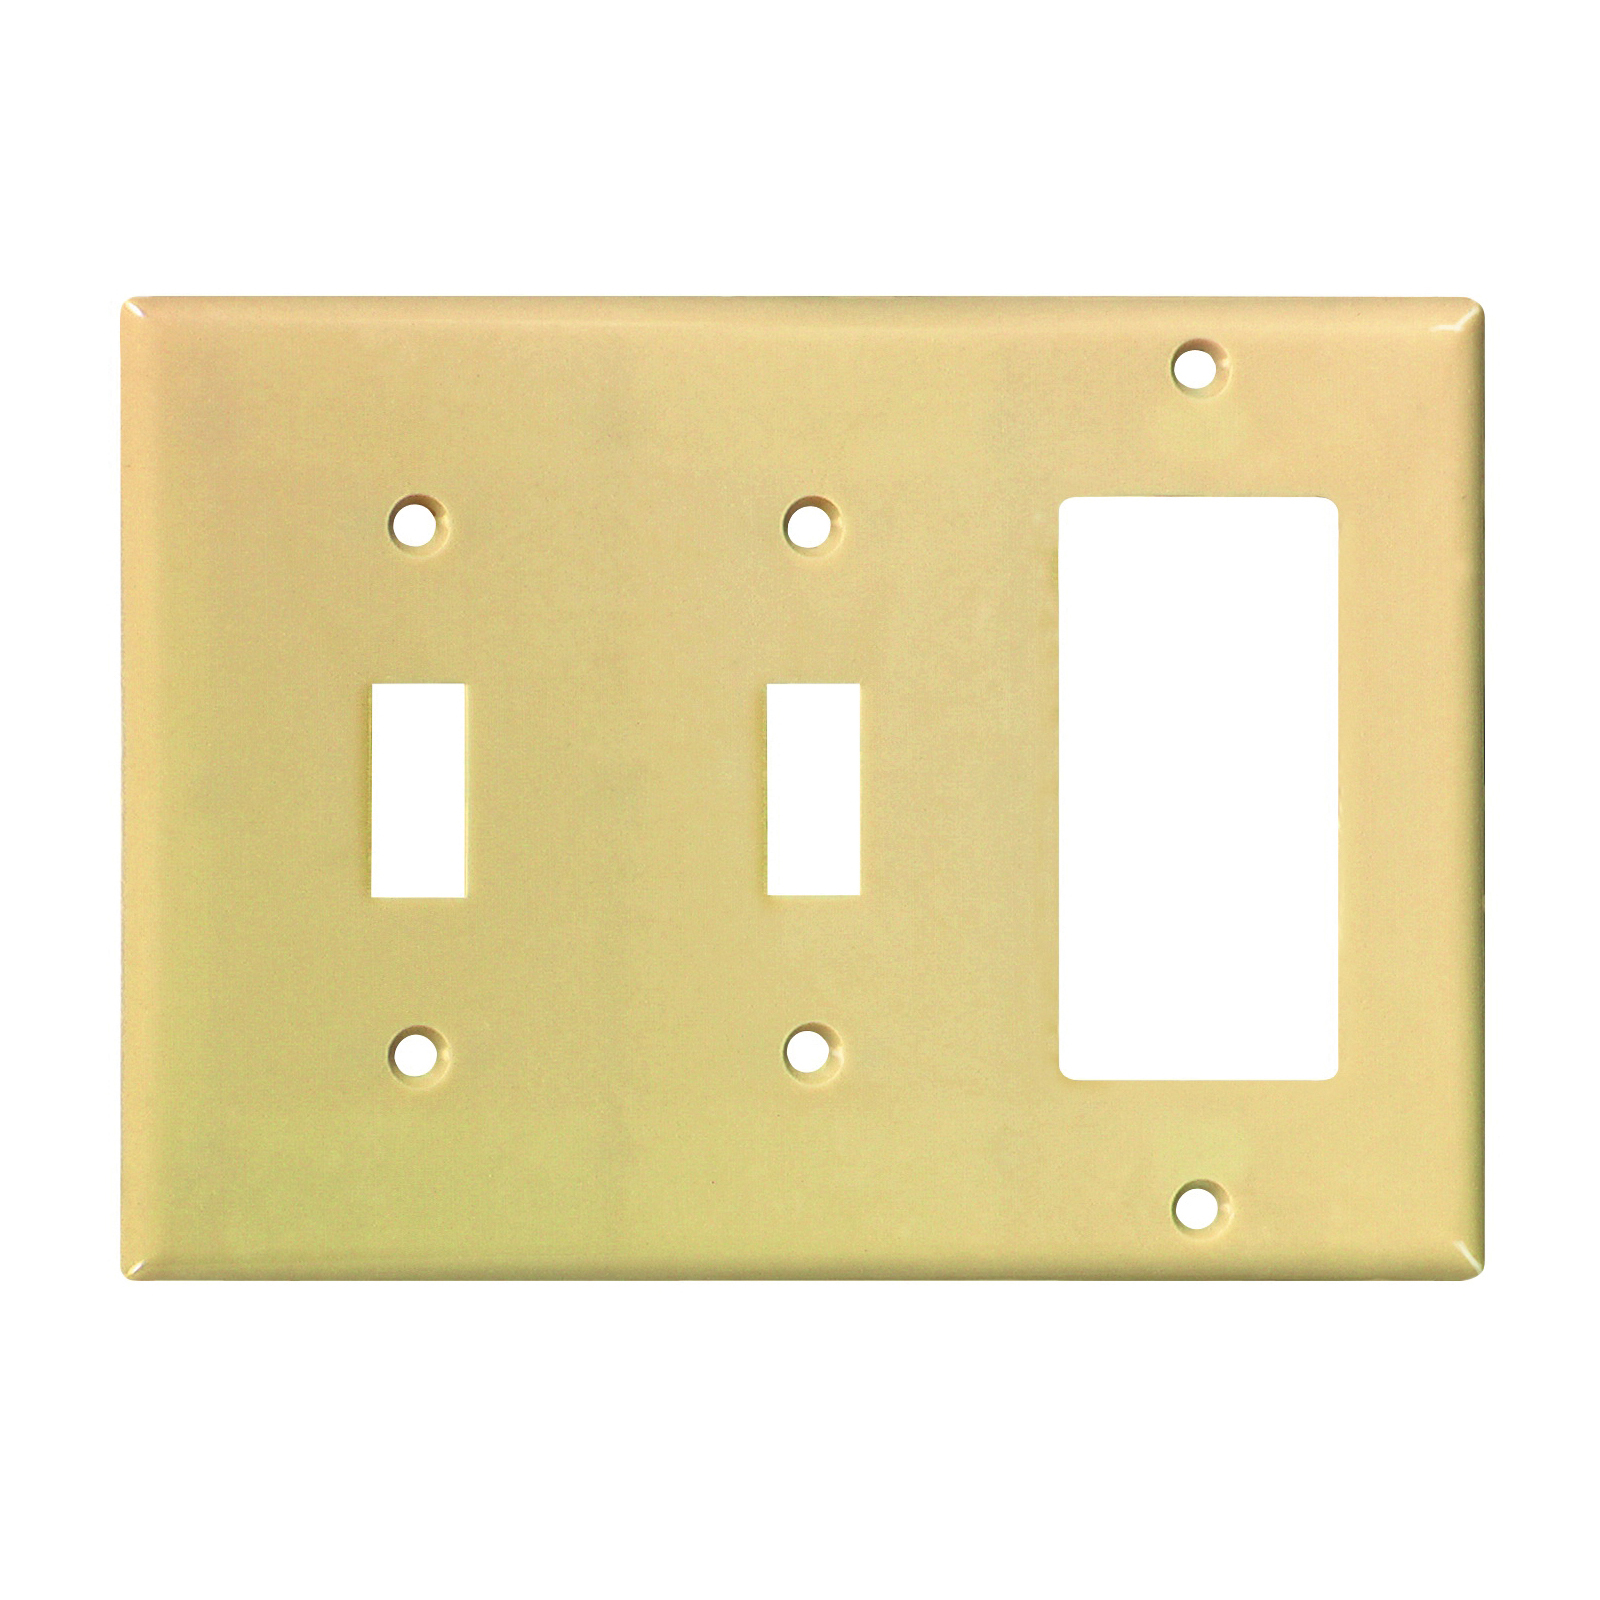 2173V-BOX Combination Wallplate, 4-1/2 in L, 6-3/8 in W, 3 -Gang, Thermoset, Ivory